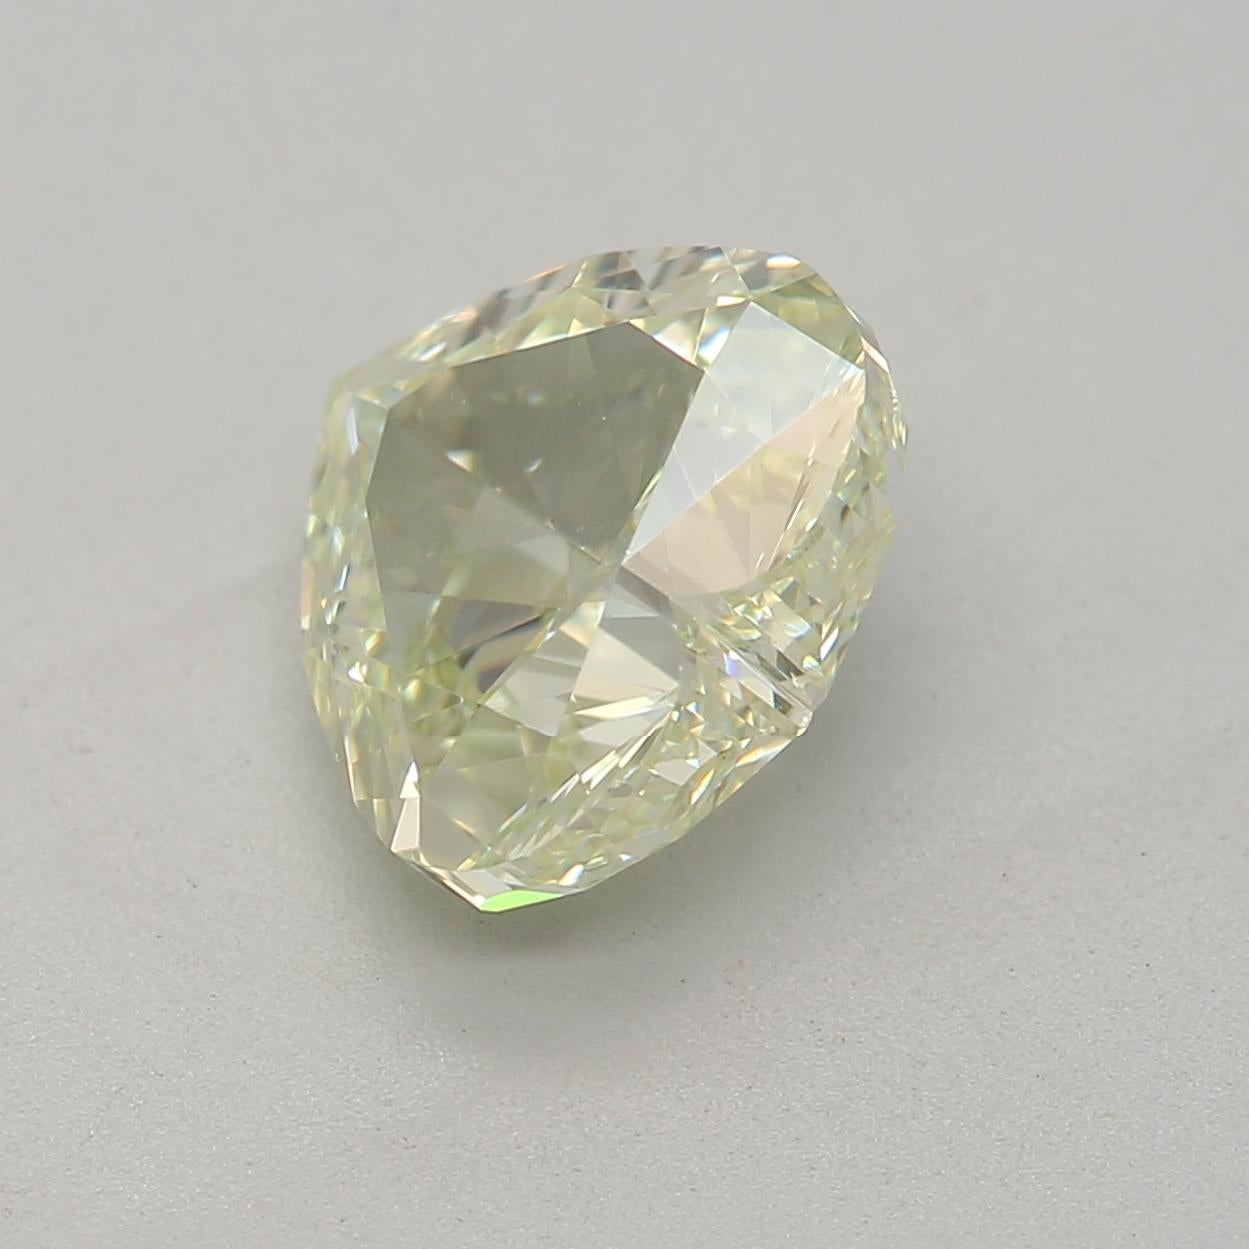 1.51 Carat Fancy Light Green Yellow Heart Cut Diamond VS1 Clarity GIA Certified In New Condition For Sale In Kowloon, HK